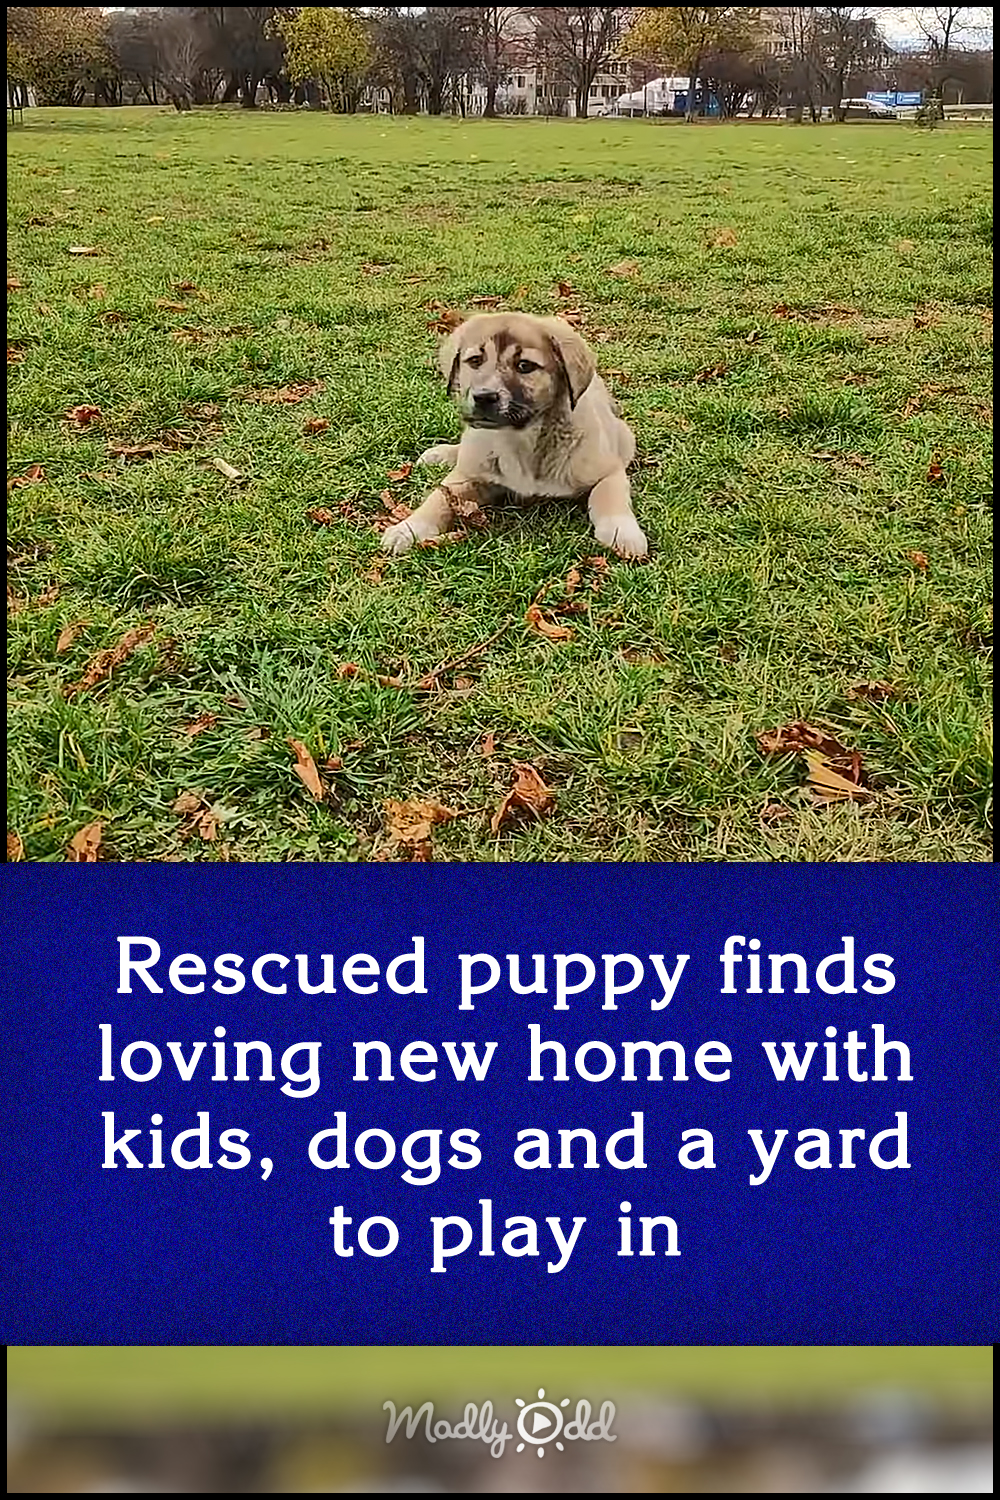 Rescued puppy finds loving new home with kids, dogs and a yard to play in